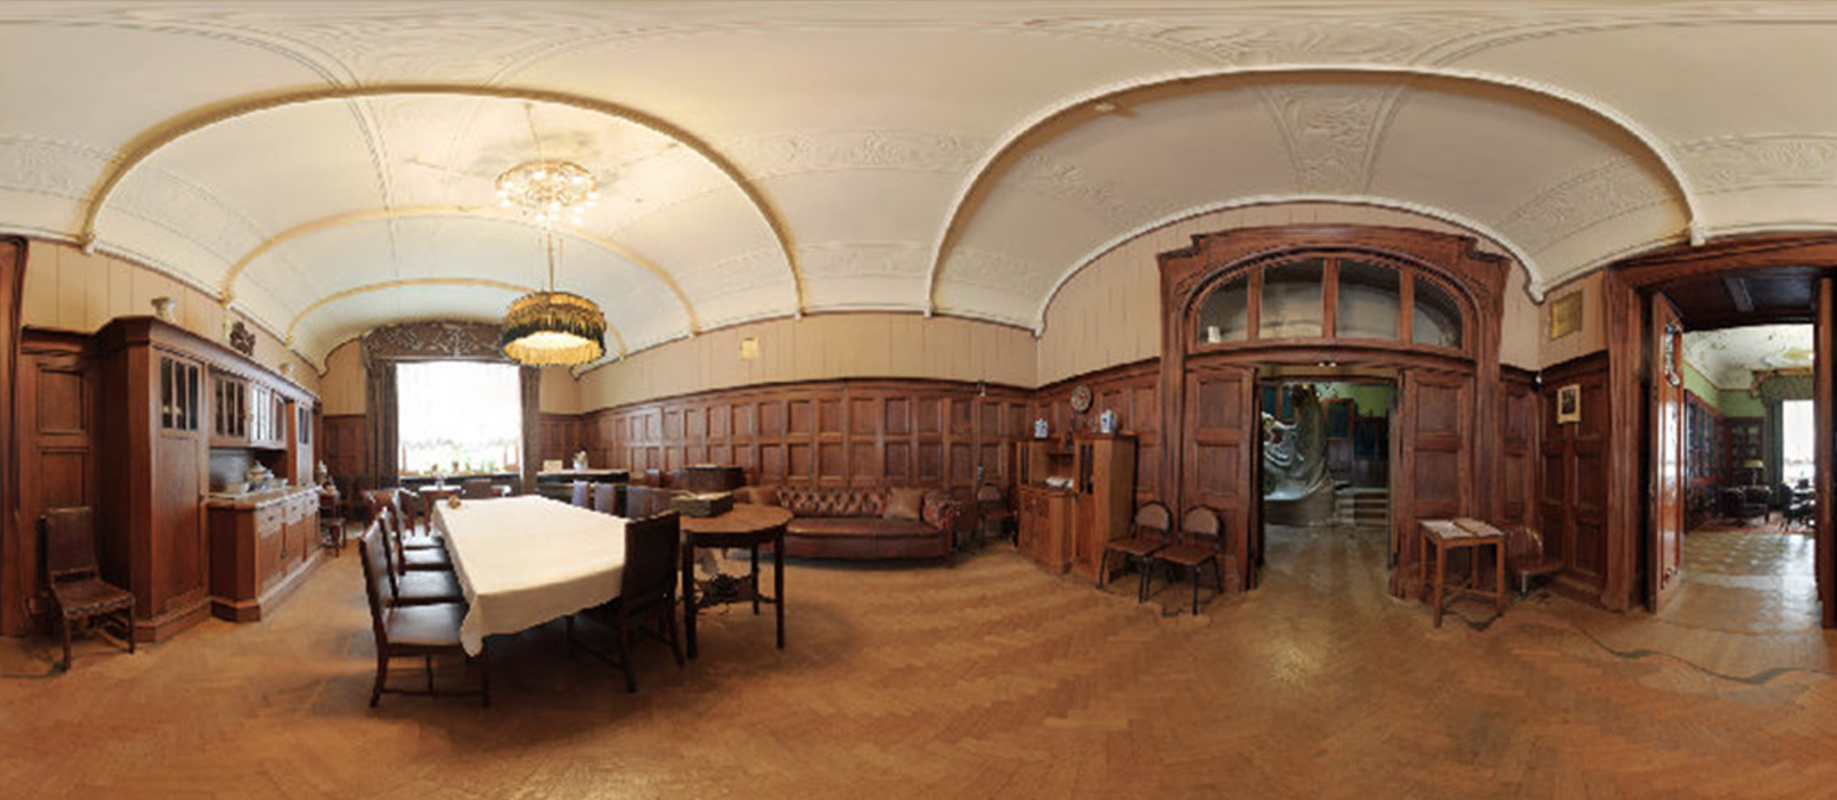 The dining and living room in the Ryabushinsky mansion: this is how it looked in the time of Maxim G